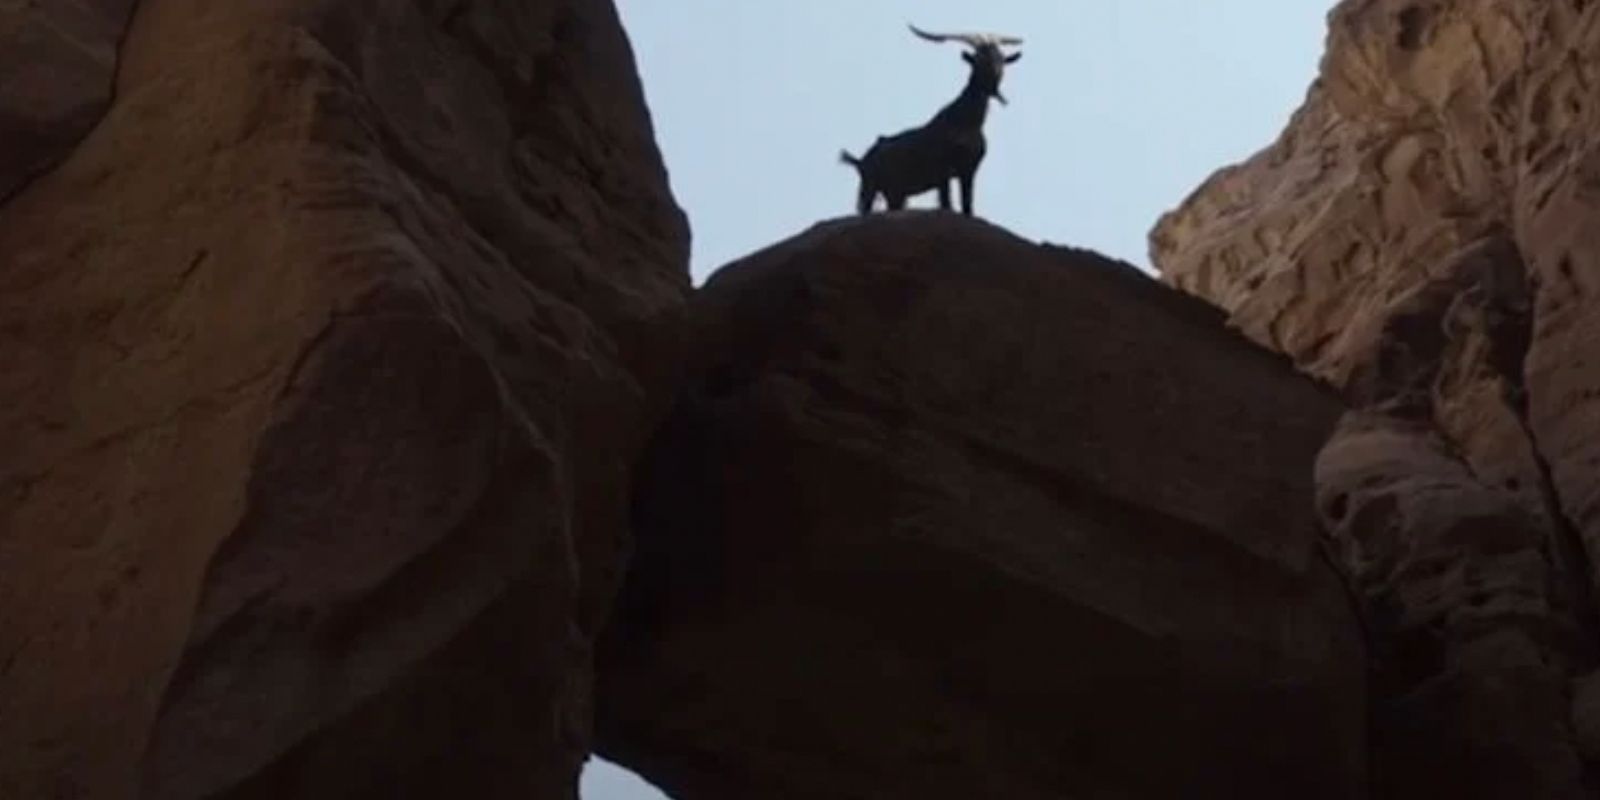 A goat on a cliff in Moon Knight Episode 4